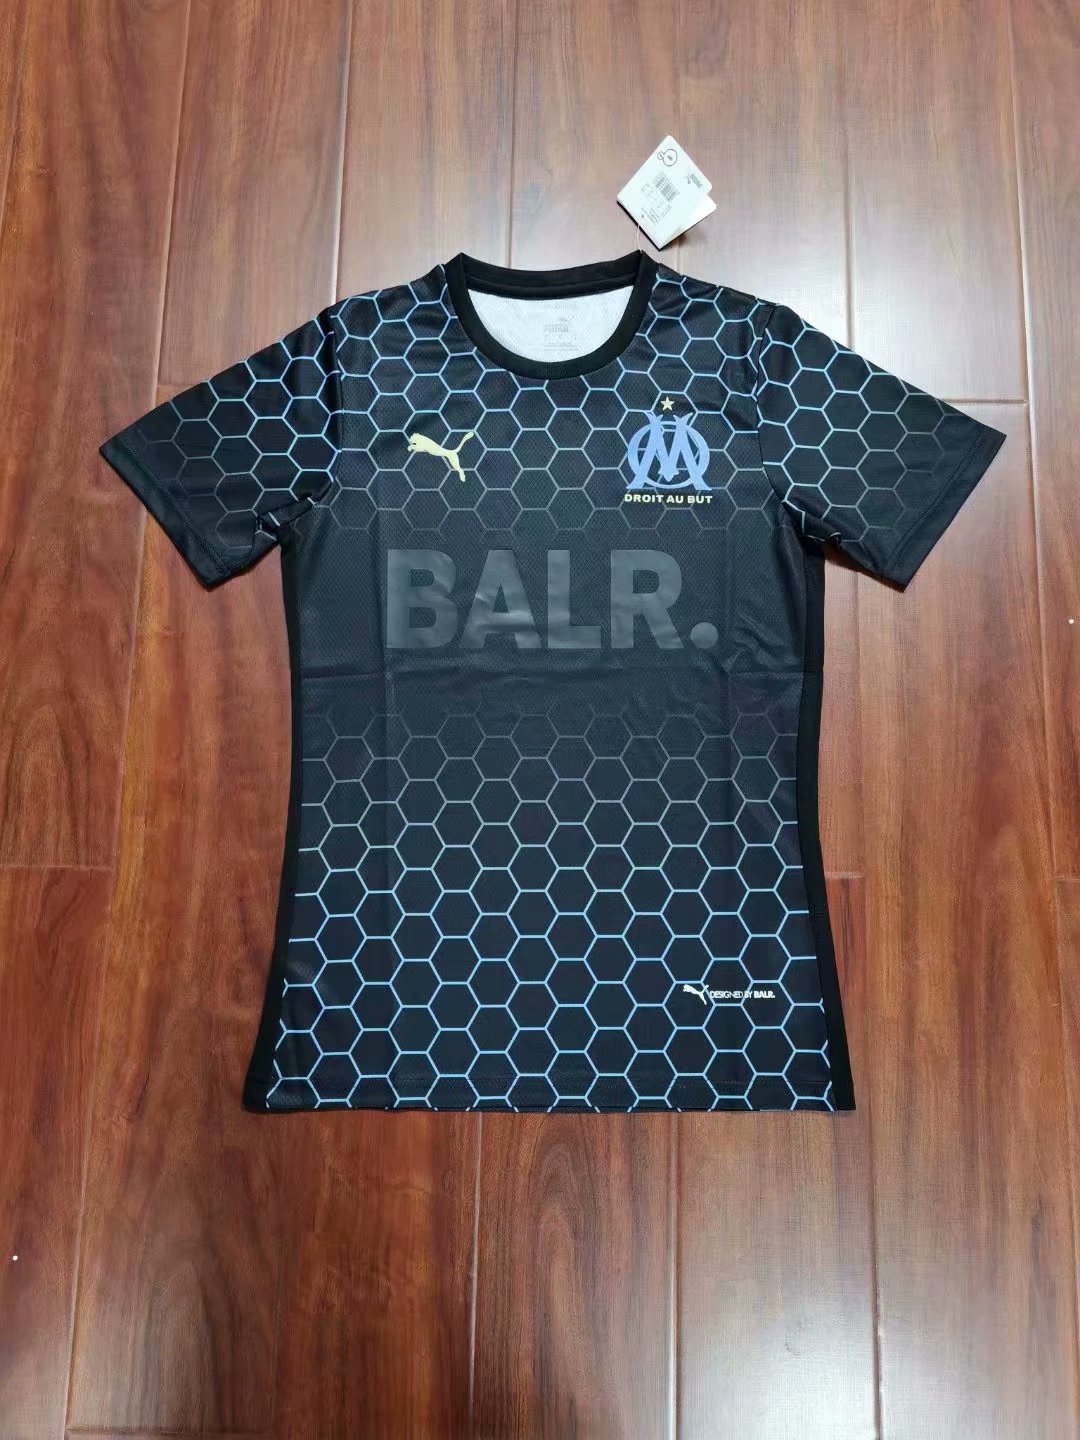 20/21 New Adult top players version Marseilles black soccer jersey ...